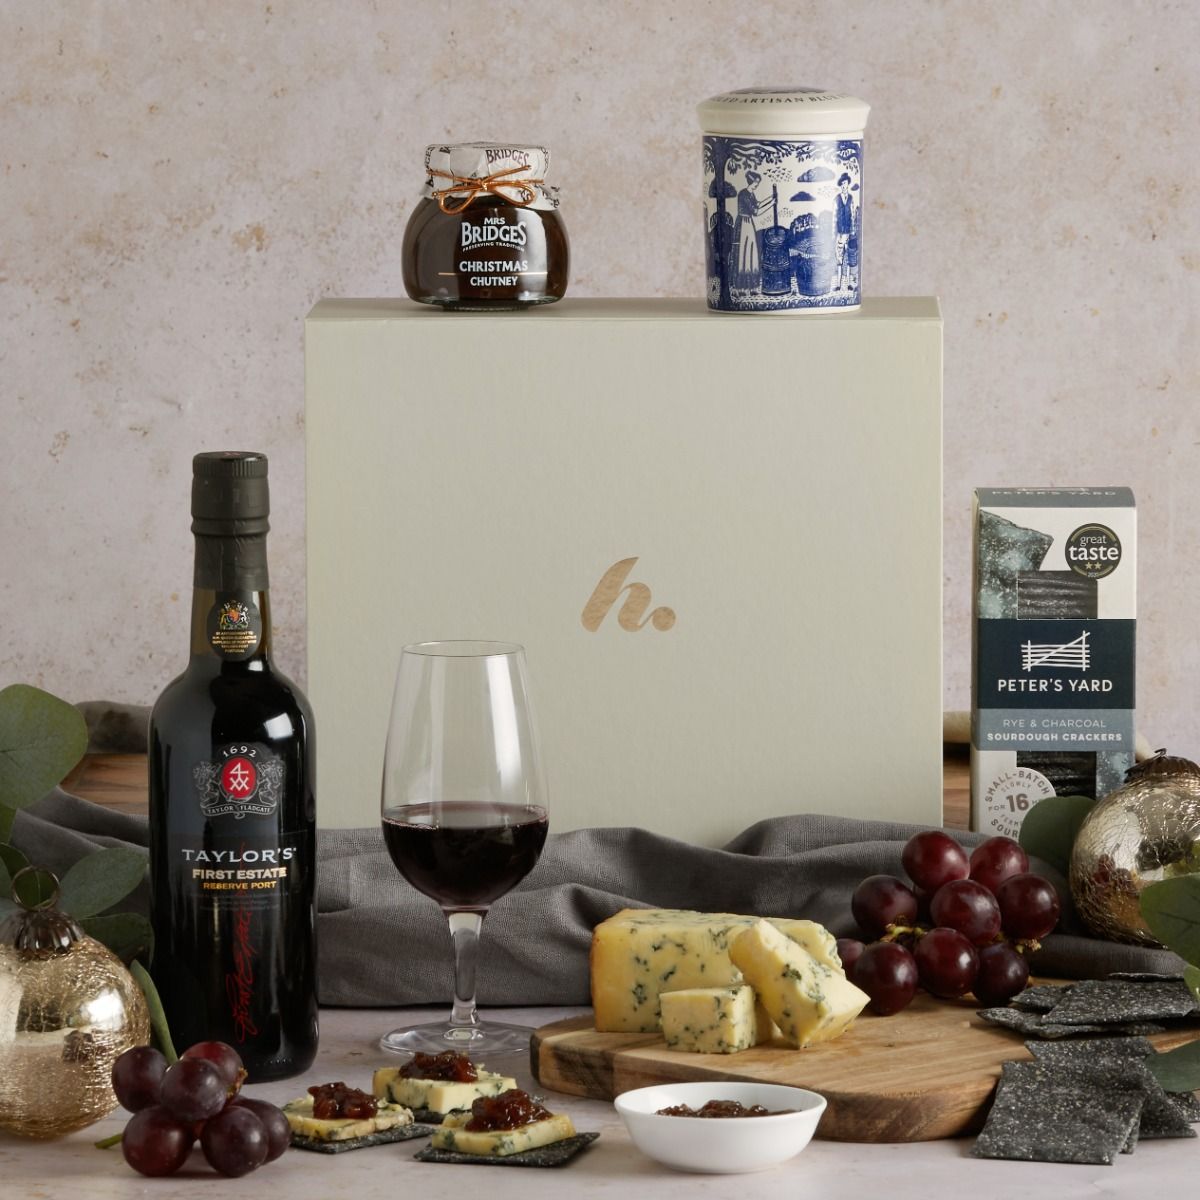 Port and Stilton Christmas hamper with contents on display